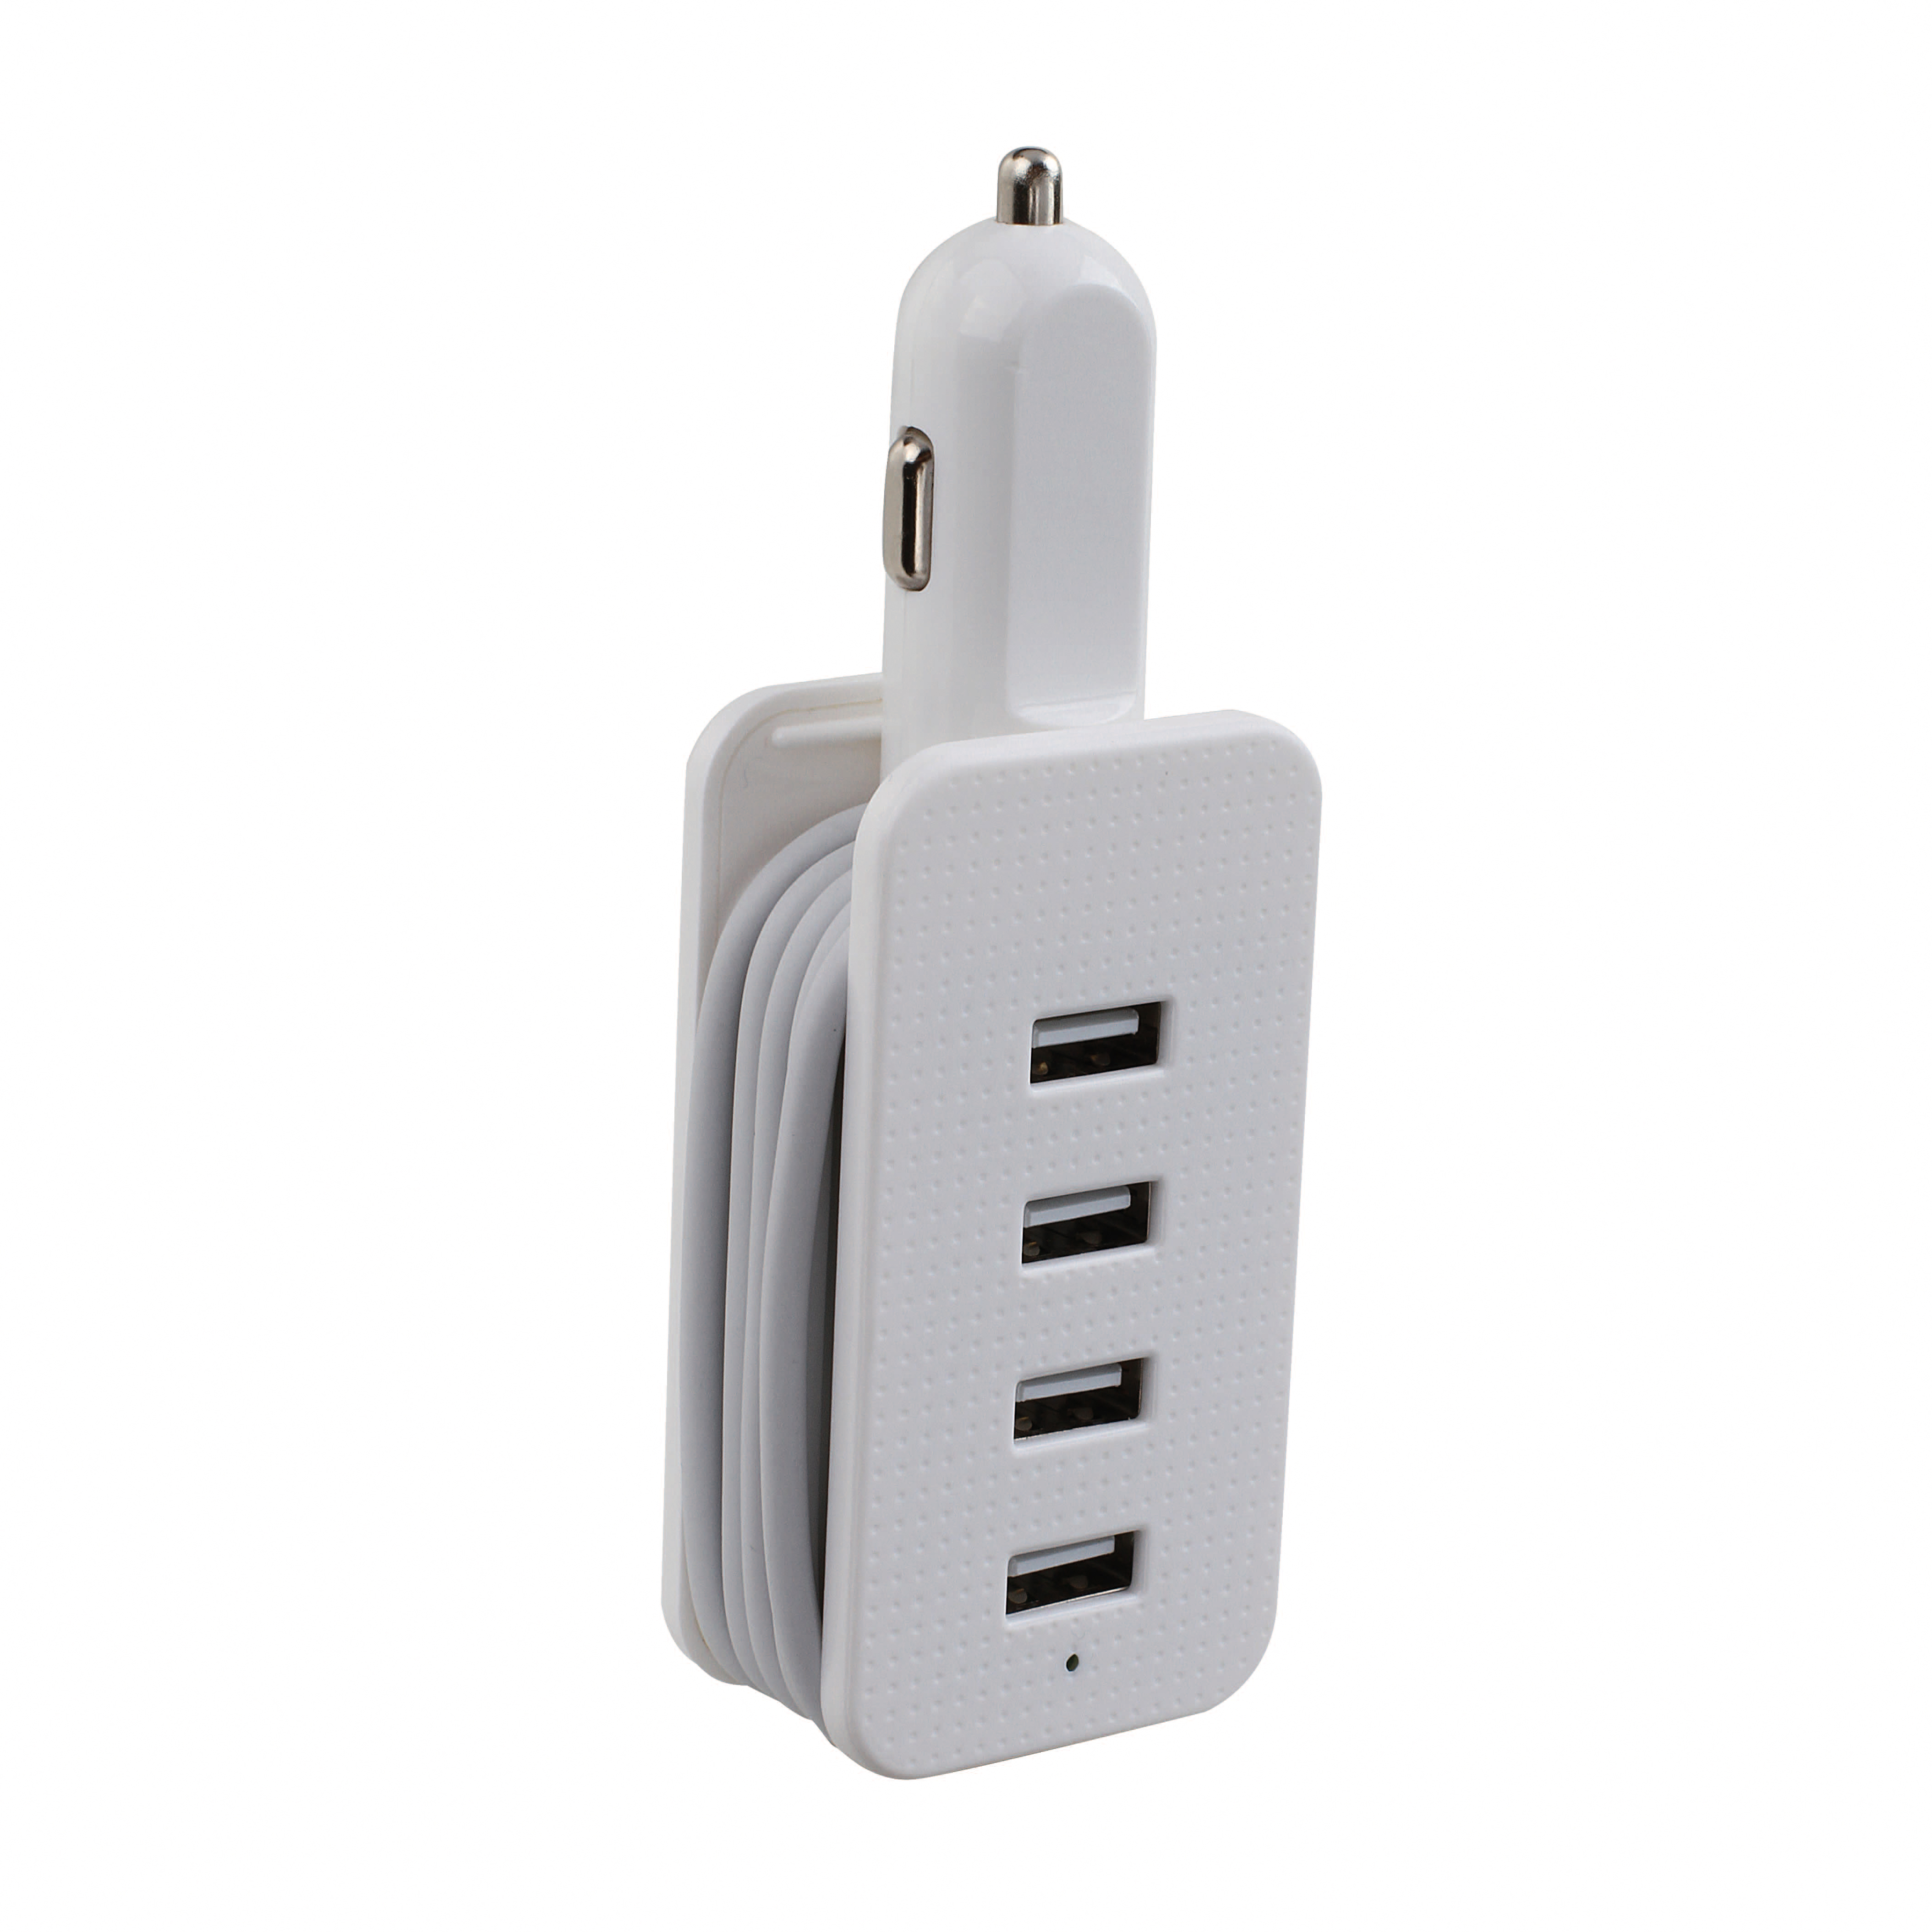 Chargeur allume cigare USB 1A CU400 – Blanc